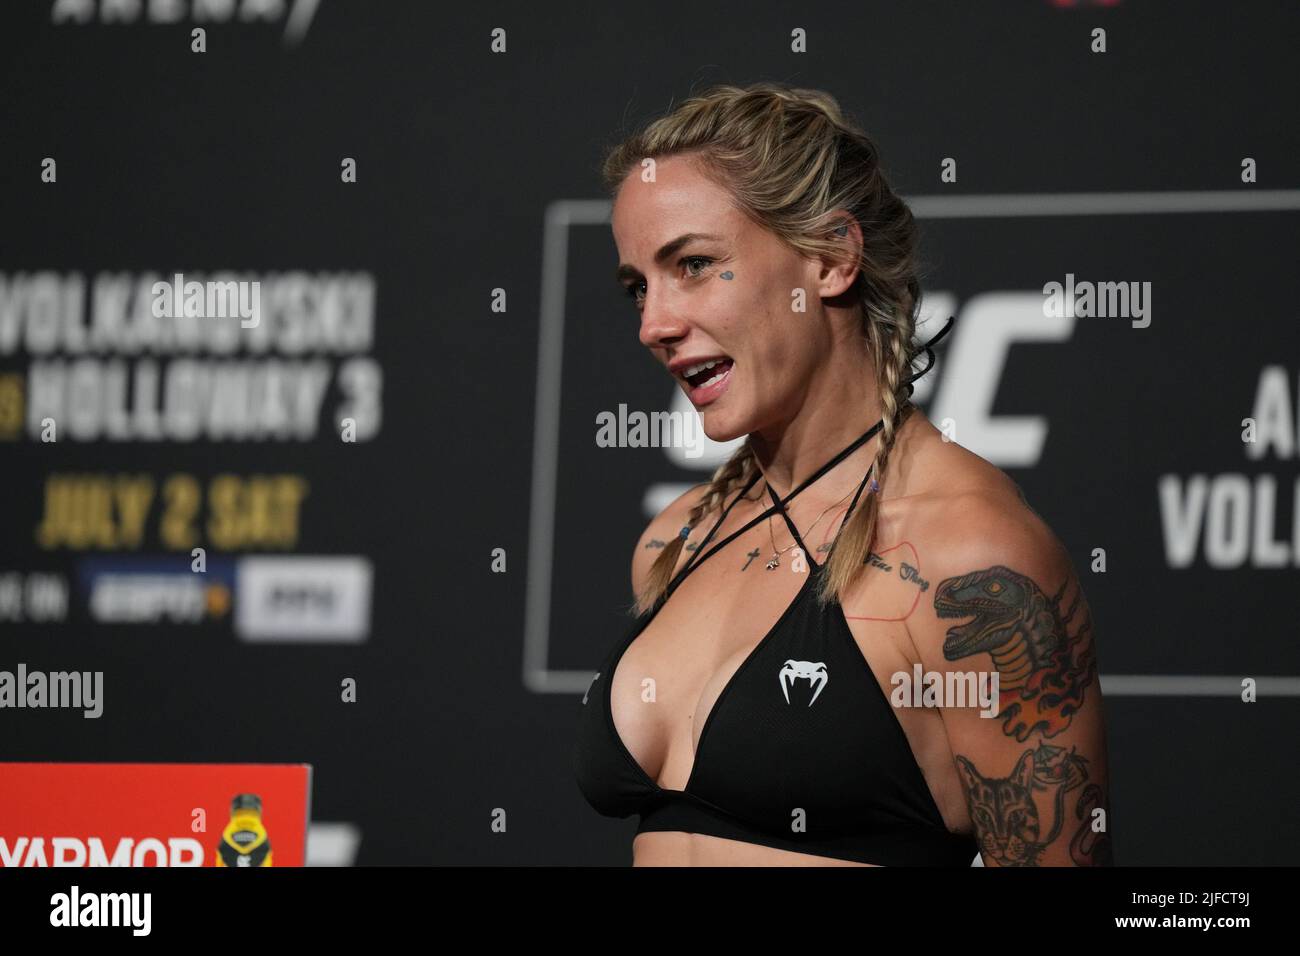 July 1, 2022, LAS VEGAS, NV, LAS VEGAS, NV, United States: LAS VEGAS, NV - June 1: Jessica-Rose Clark steps on the scale for the official weigh-ins at T-Mobile Arena for UFC 276 on July 1, 2022 in LAS VEGAS, NV, United States. (Credit Image: © Louis Grasse/PX Imagens via ZUMA Press Wire) Stock Photo